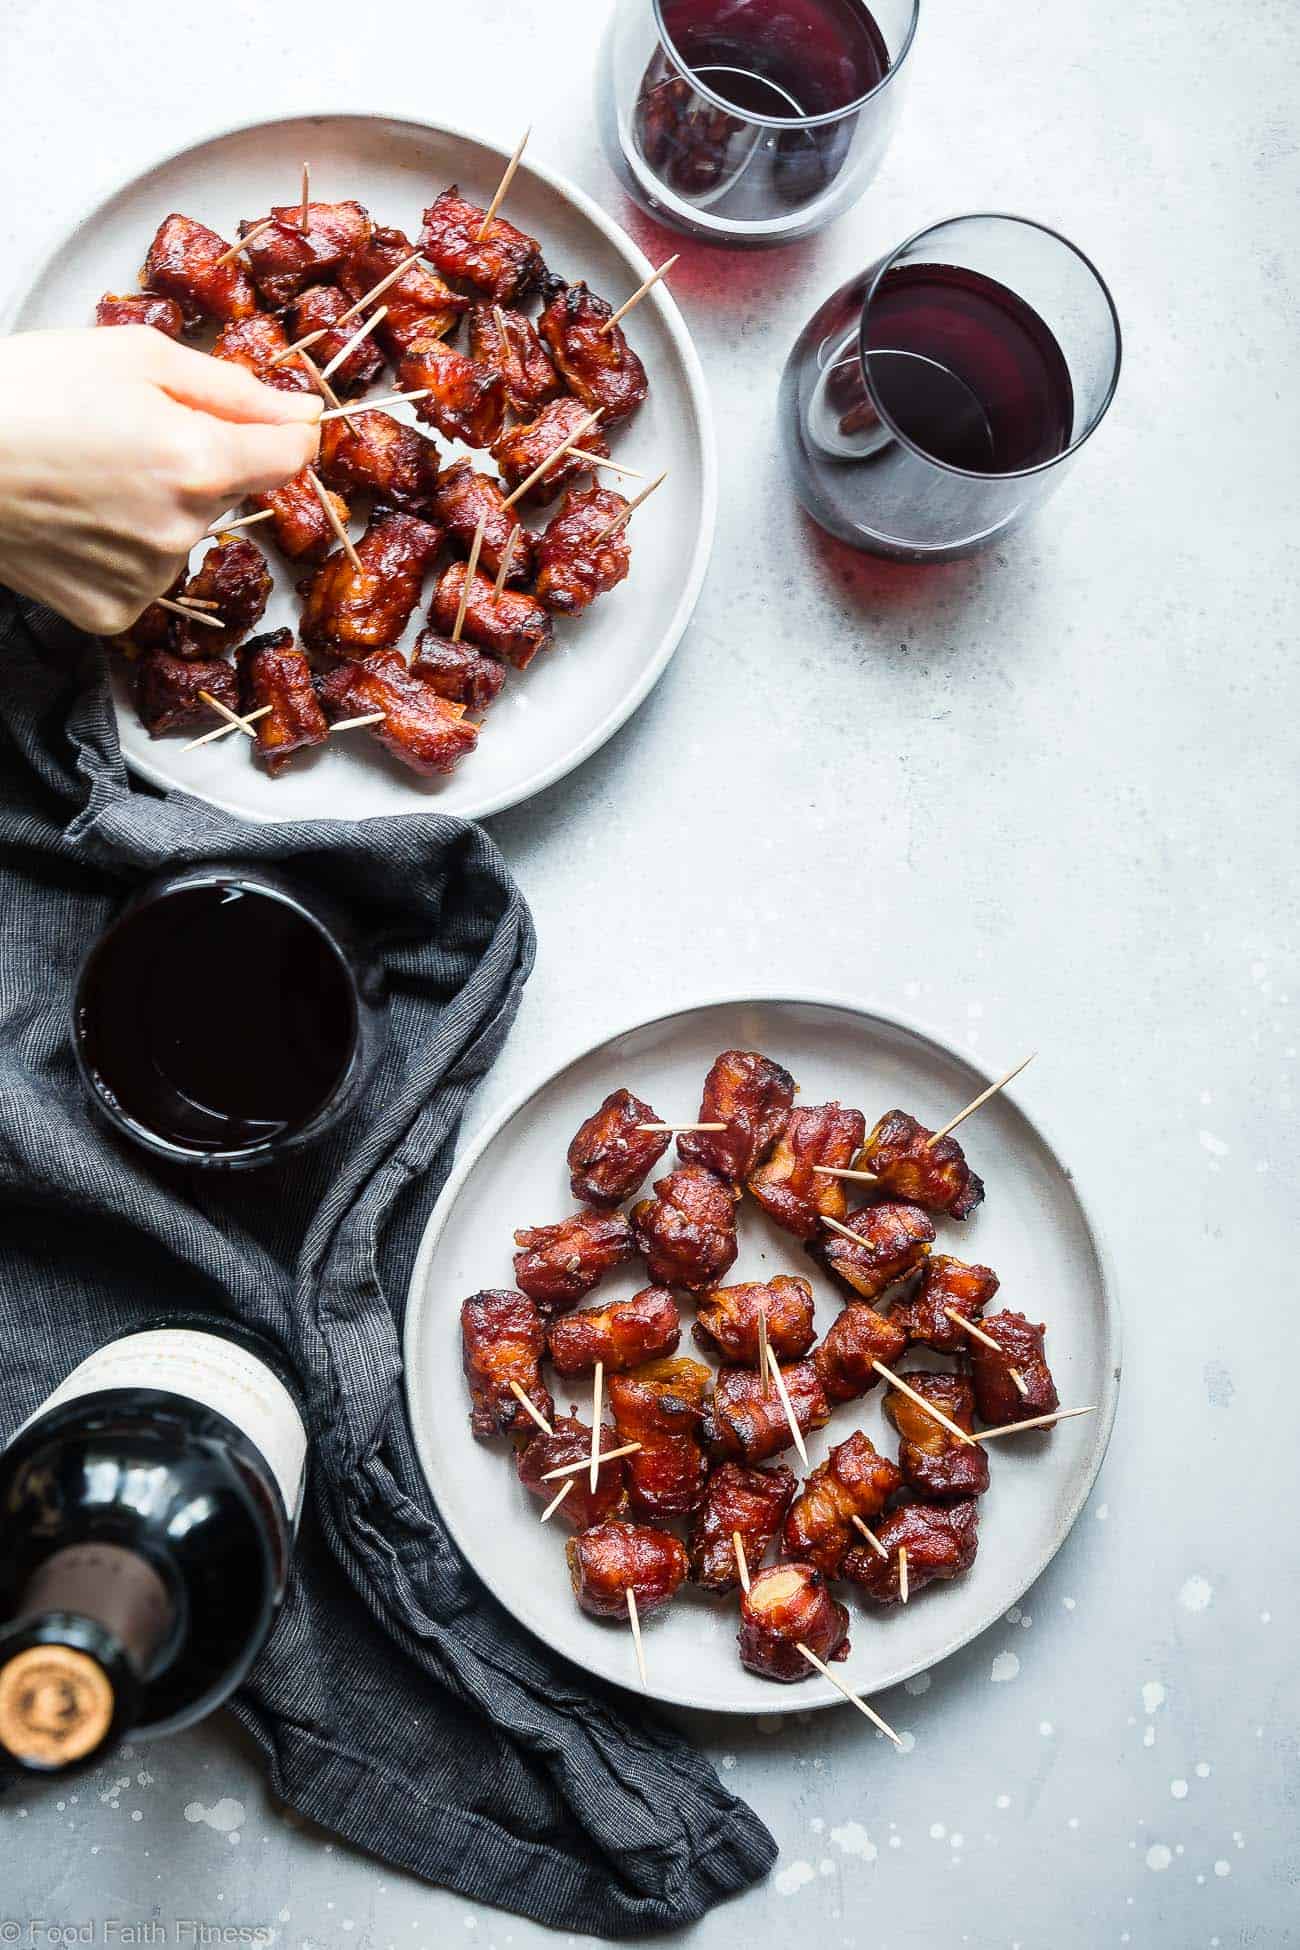 Whole30 Sweet and Sour Pineapple Wrapped In Bacon - Salty, sweet and so addicting! An easy healthy and paleo friendly appetizer that you would never believe is gluten/grain/dairy/sugar free and only 35 calories a bite! | Foodfaithfitness.com | @Foodfaithfit